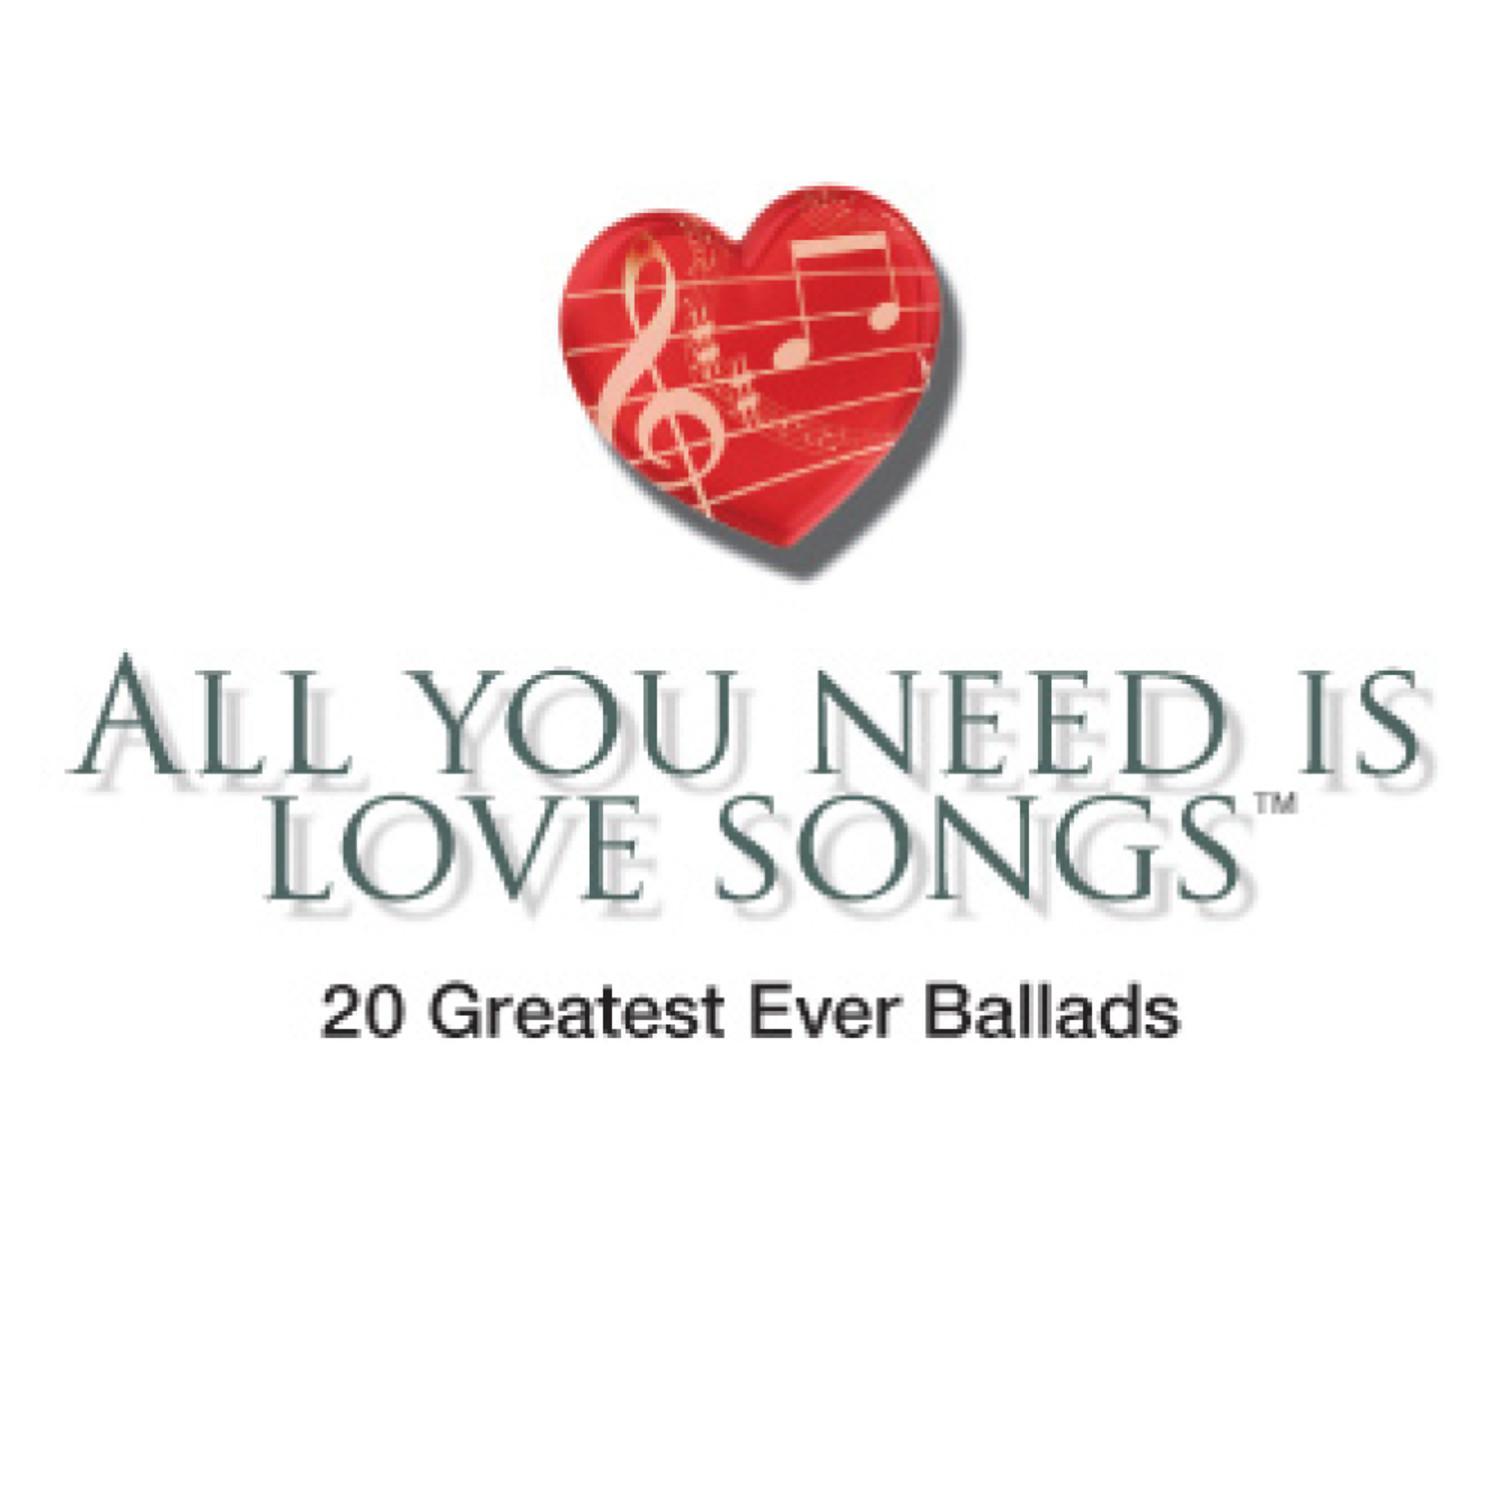 All You Need Is Love Songs